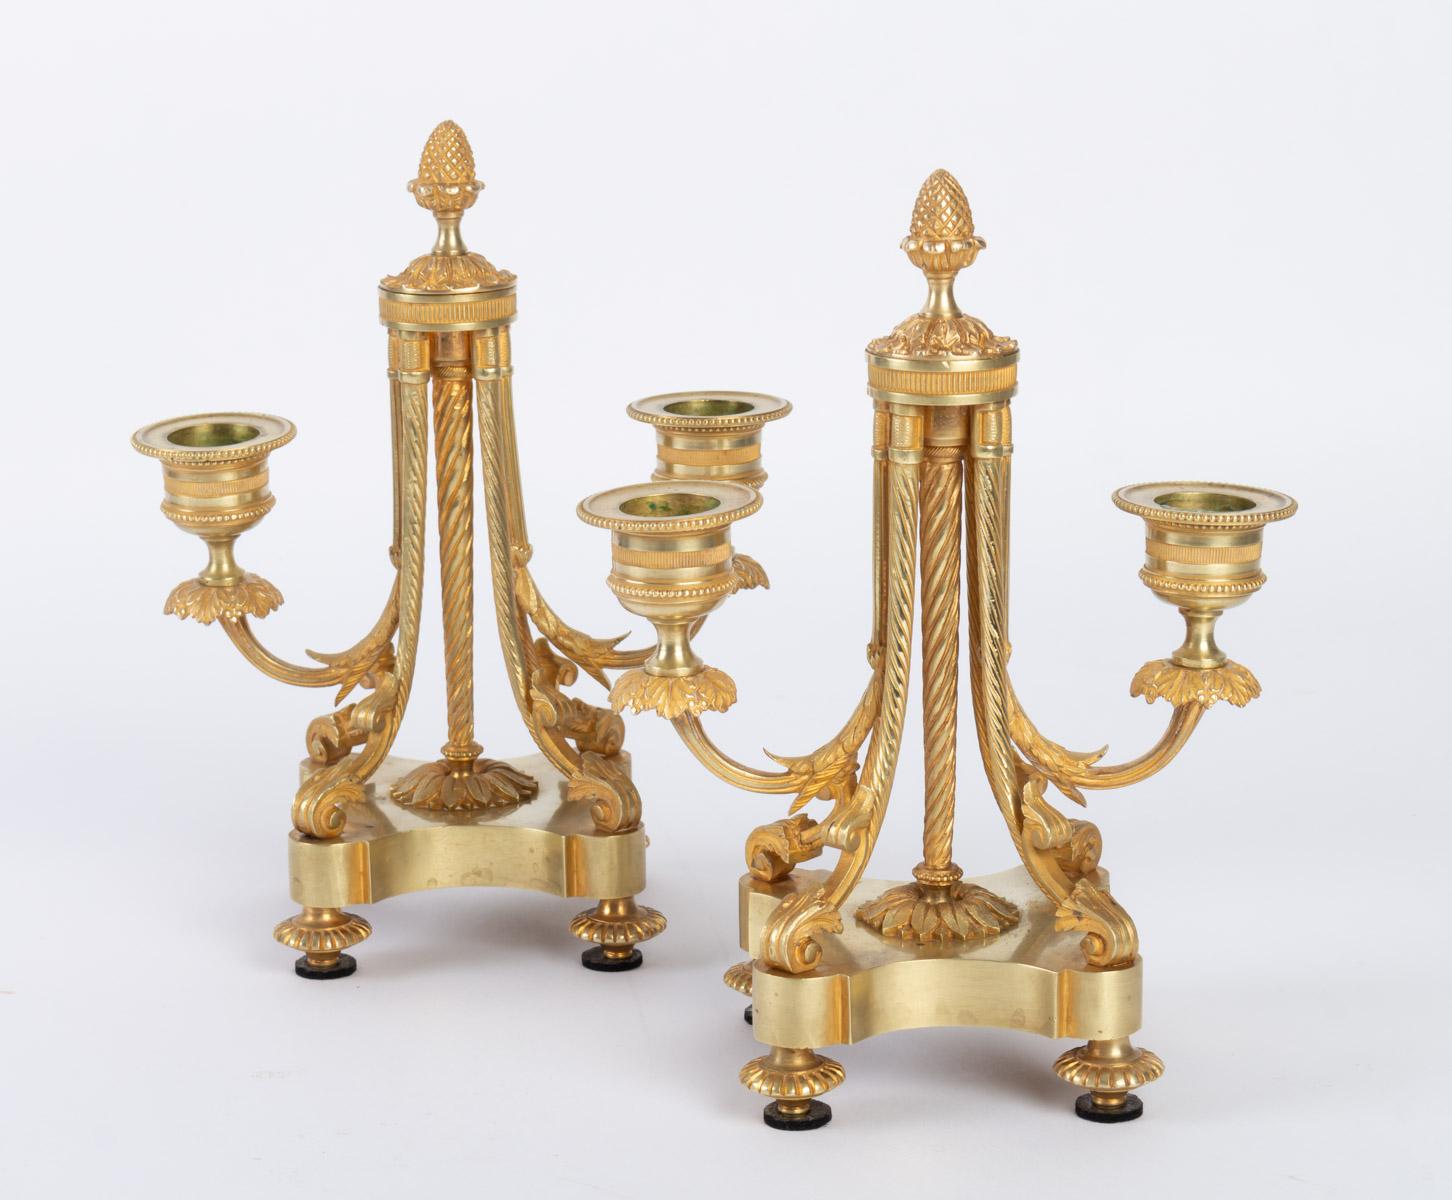 Pair of atypically shaped two-light candleholders. Neoclassical decoration inspired by the Louis XVI period. Gilded bronze, circa 1880.

Measures: H 21 cm, W 16 cm, D 9 cm.